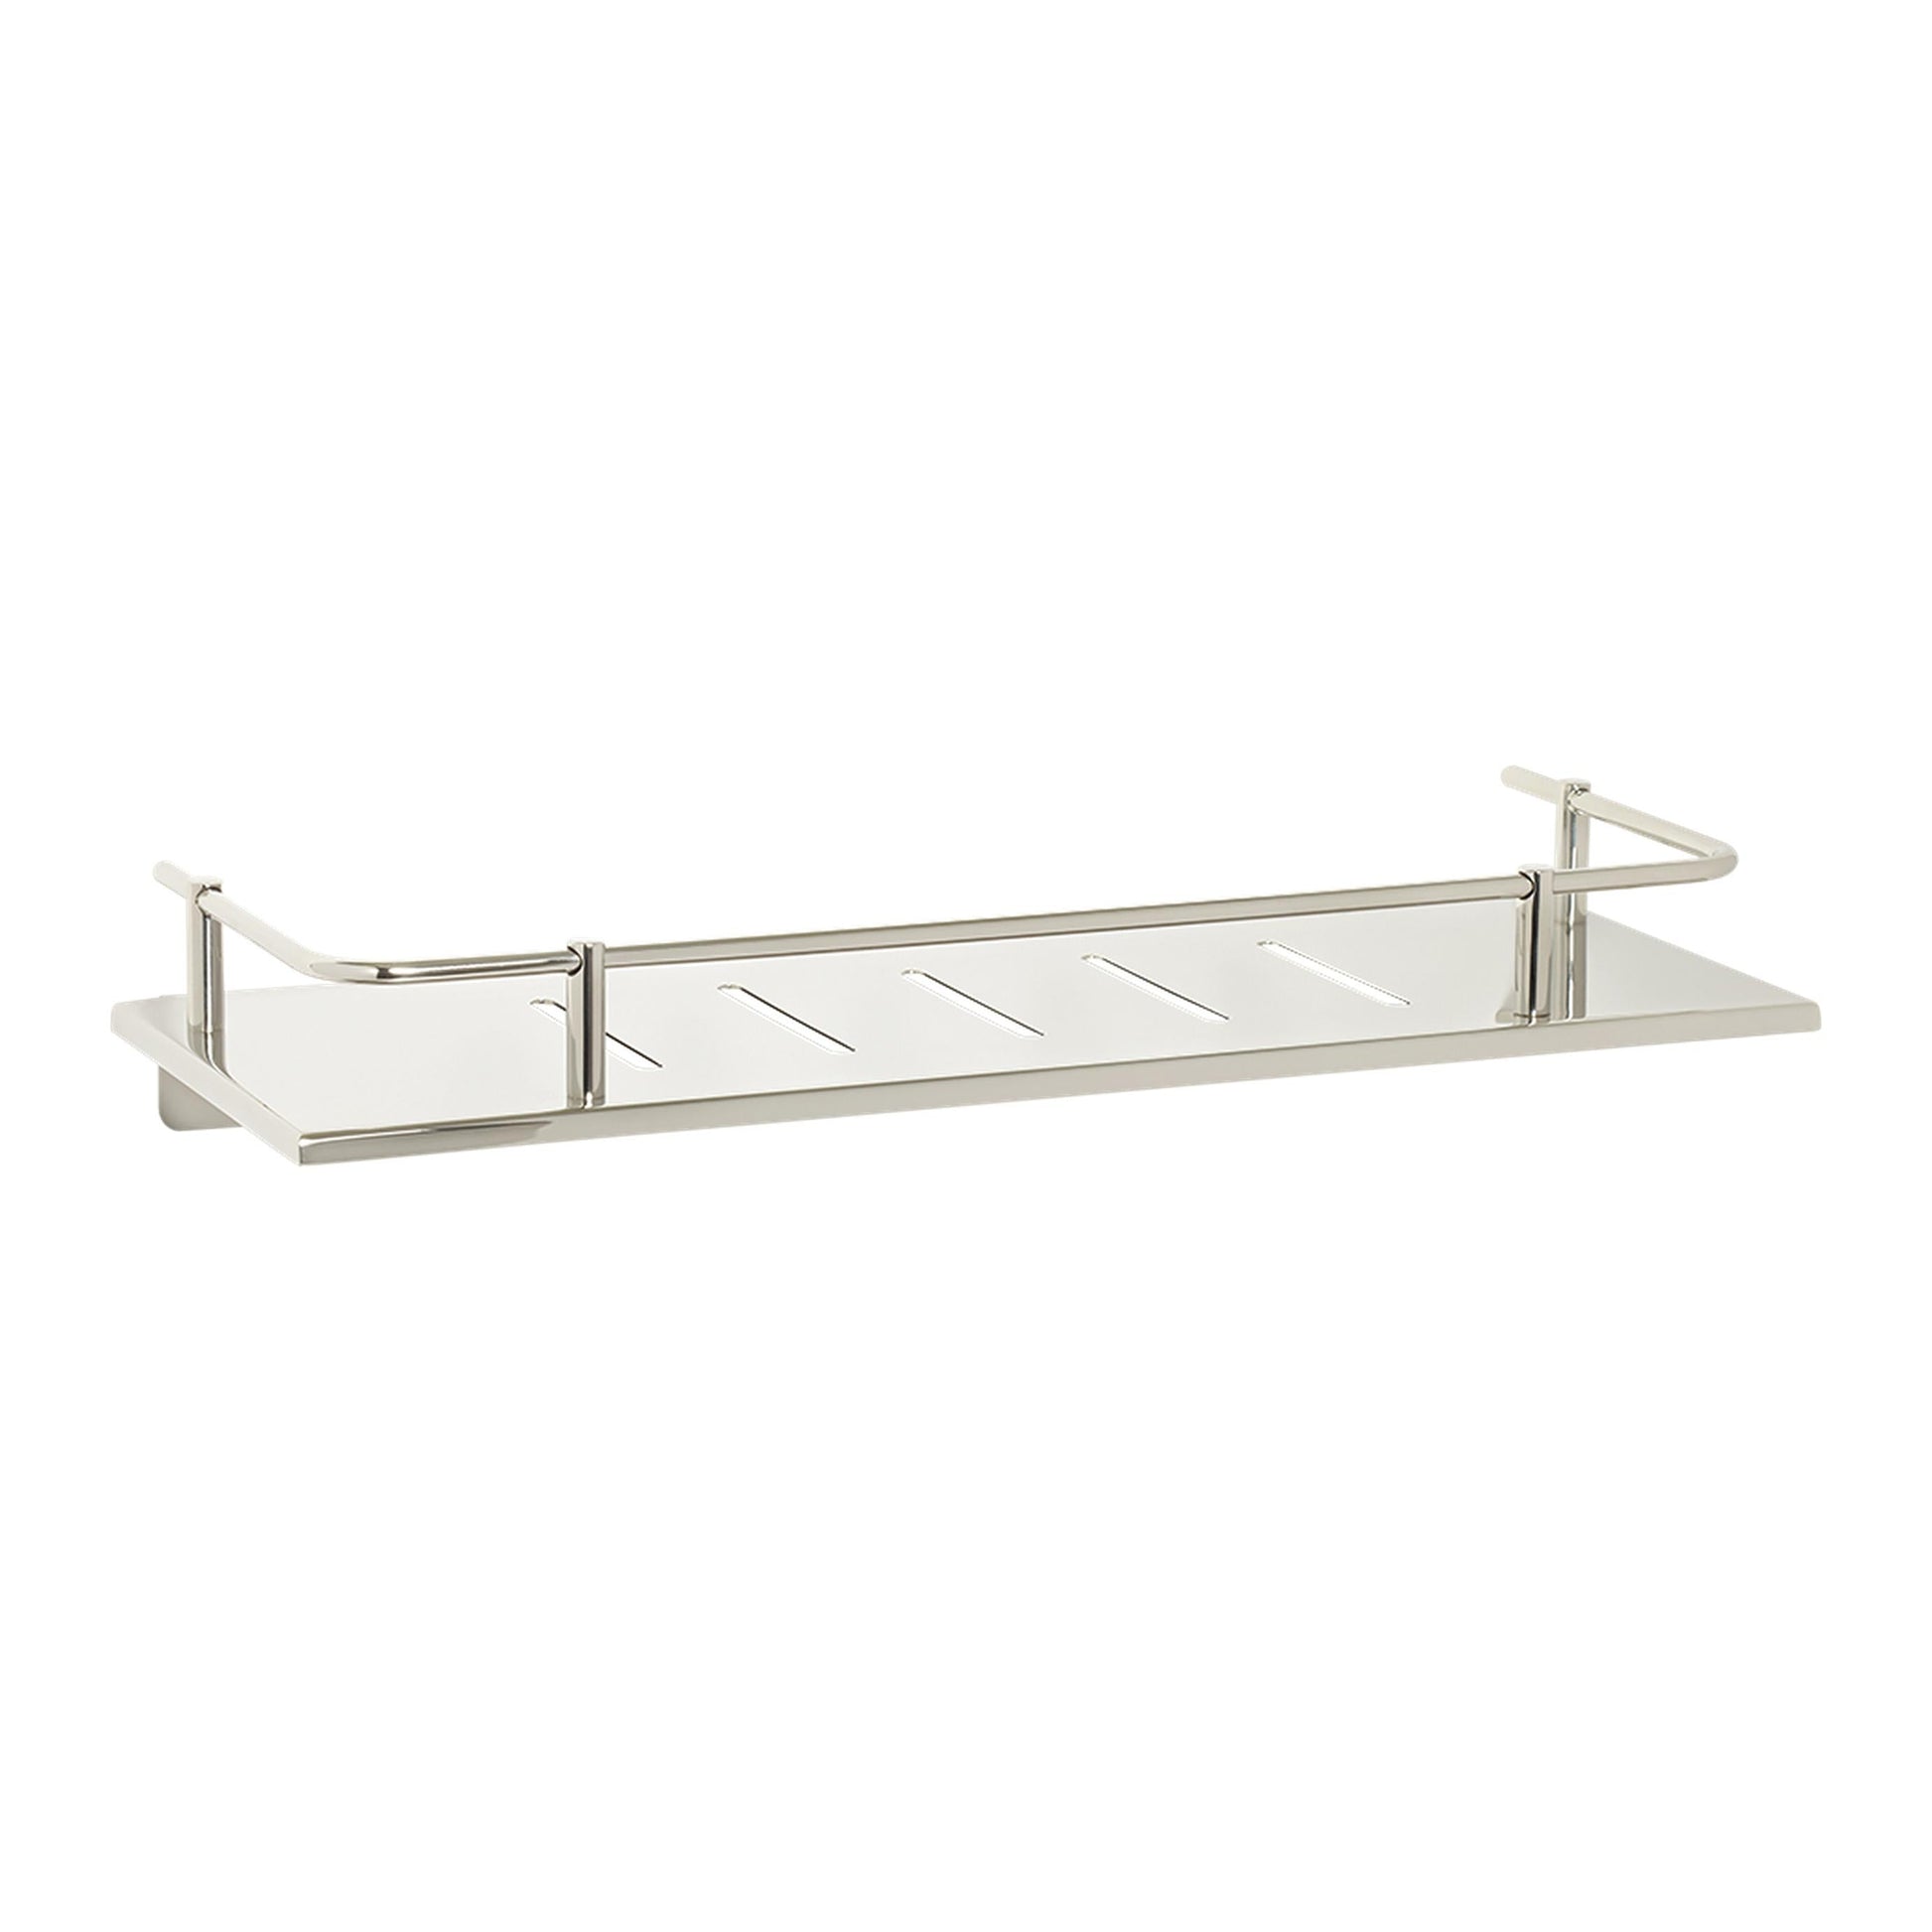 Seachrome Lifestyle and Wellness 720 Series 16" x 6" Rectangular Sundries Shower Shelf With Rail in Polished Stainless Finish